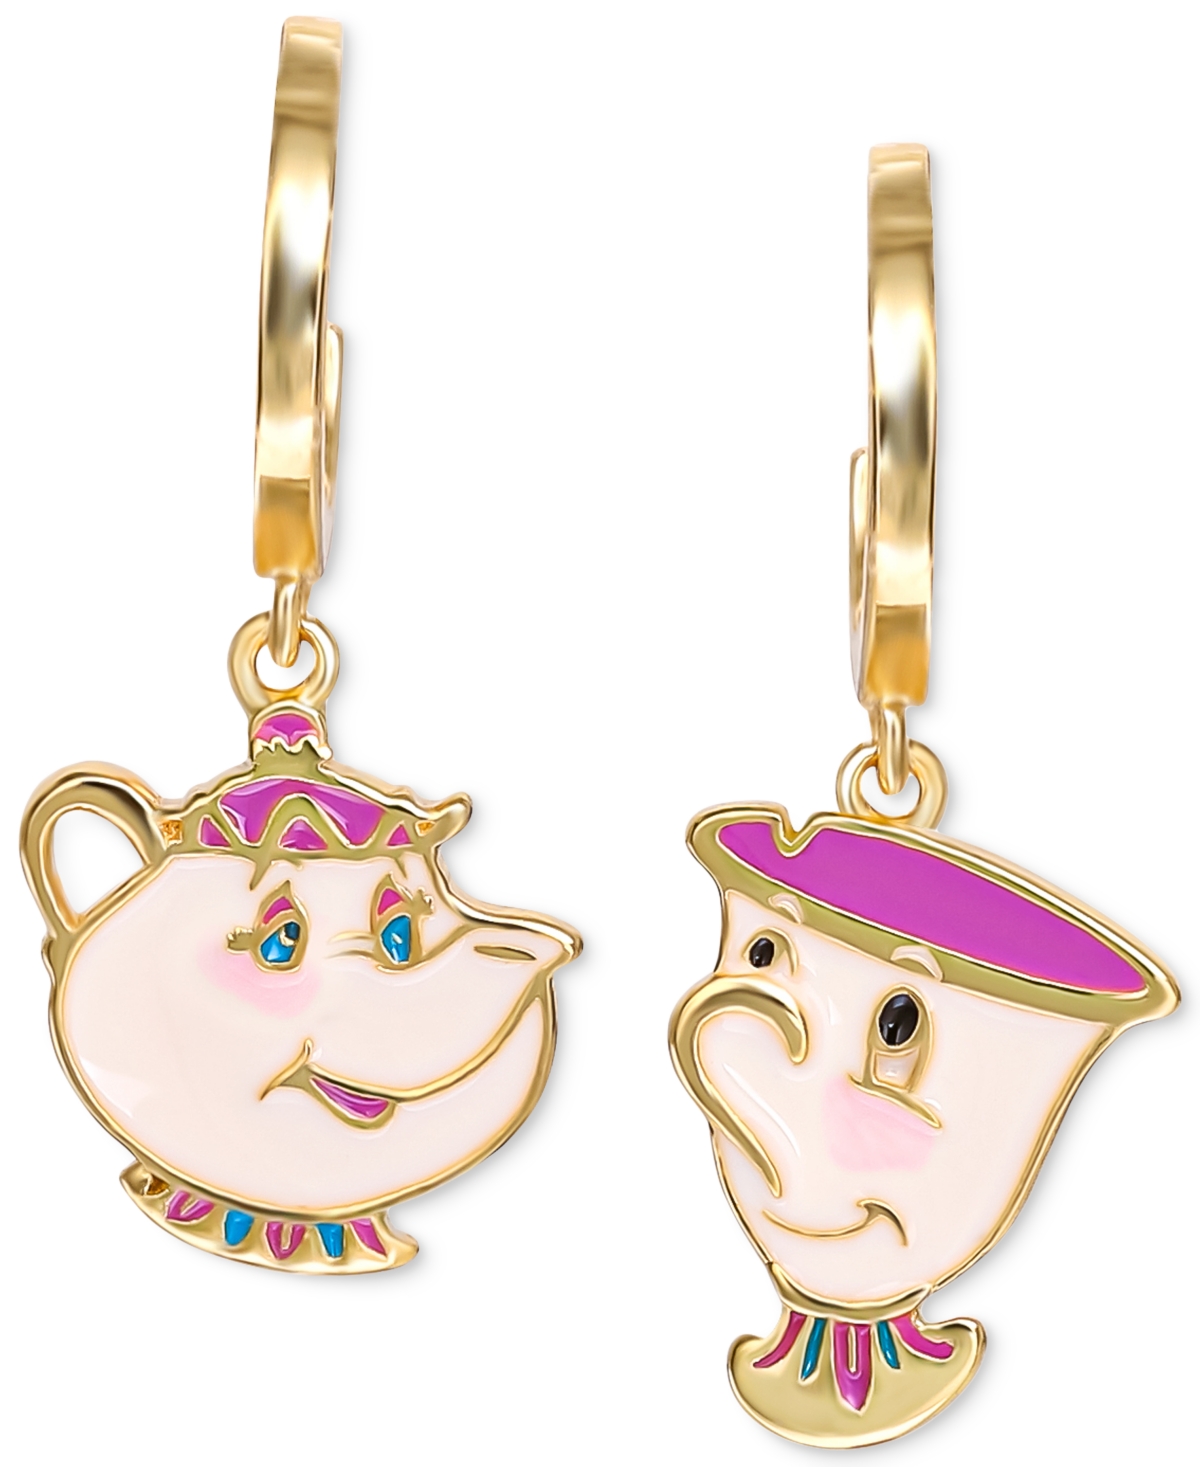 Enamel Beauty and the Beast Mrs. Potts & Chip Mismatch Dangle Hoop Earrings in 18k Gold-Plated Sterling Silver - Gold Over Silver